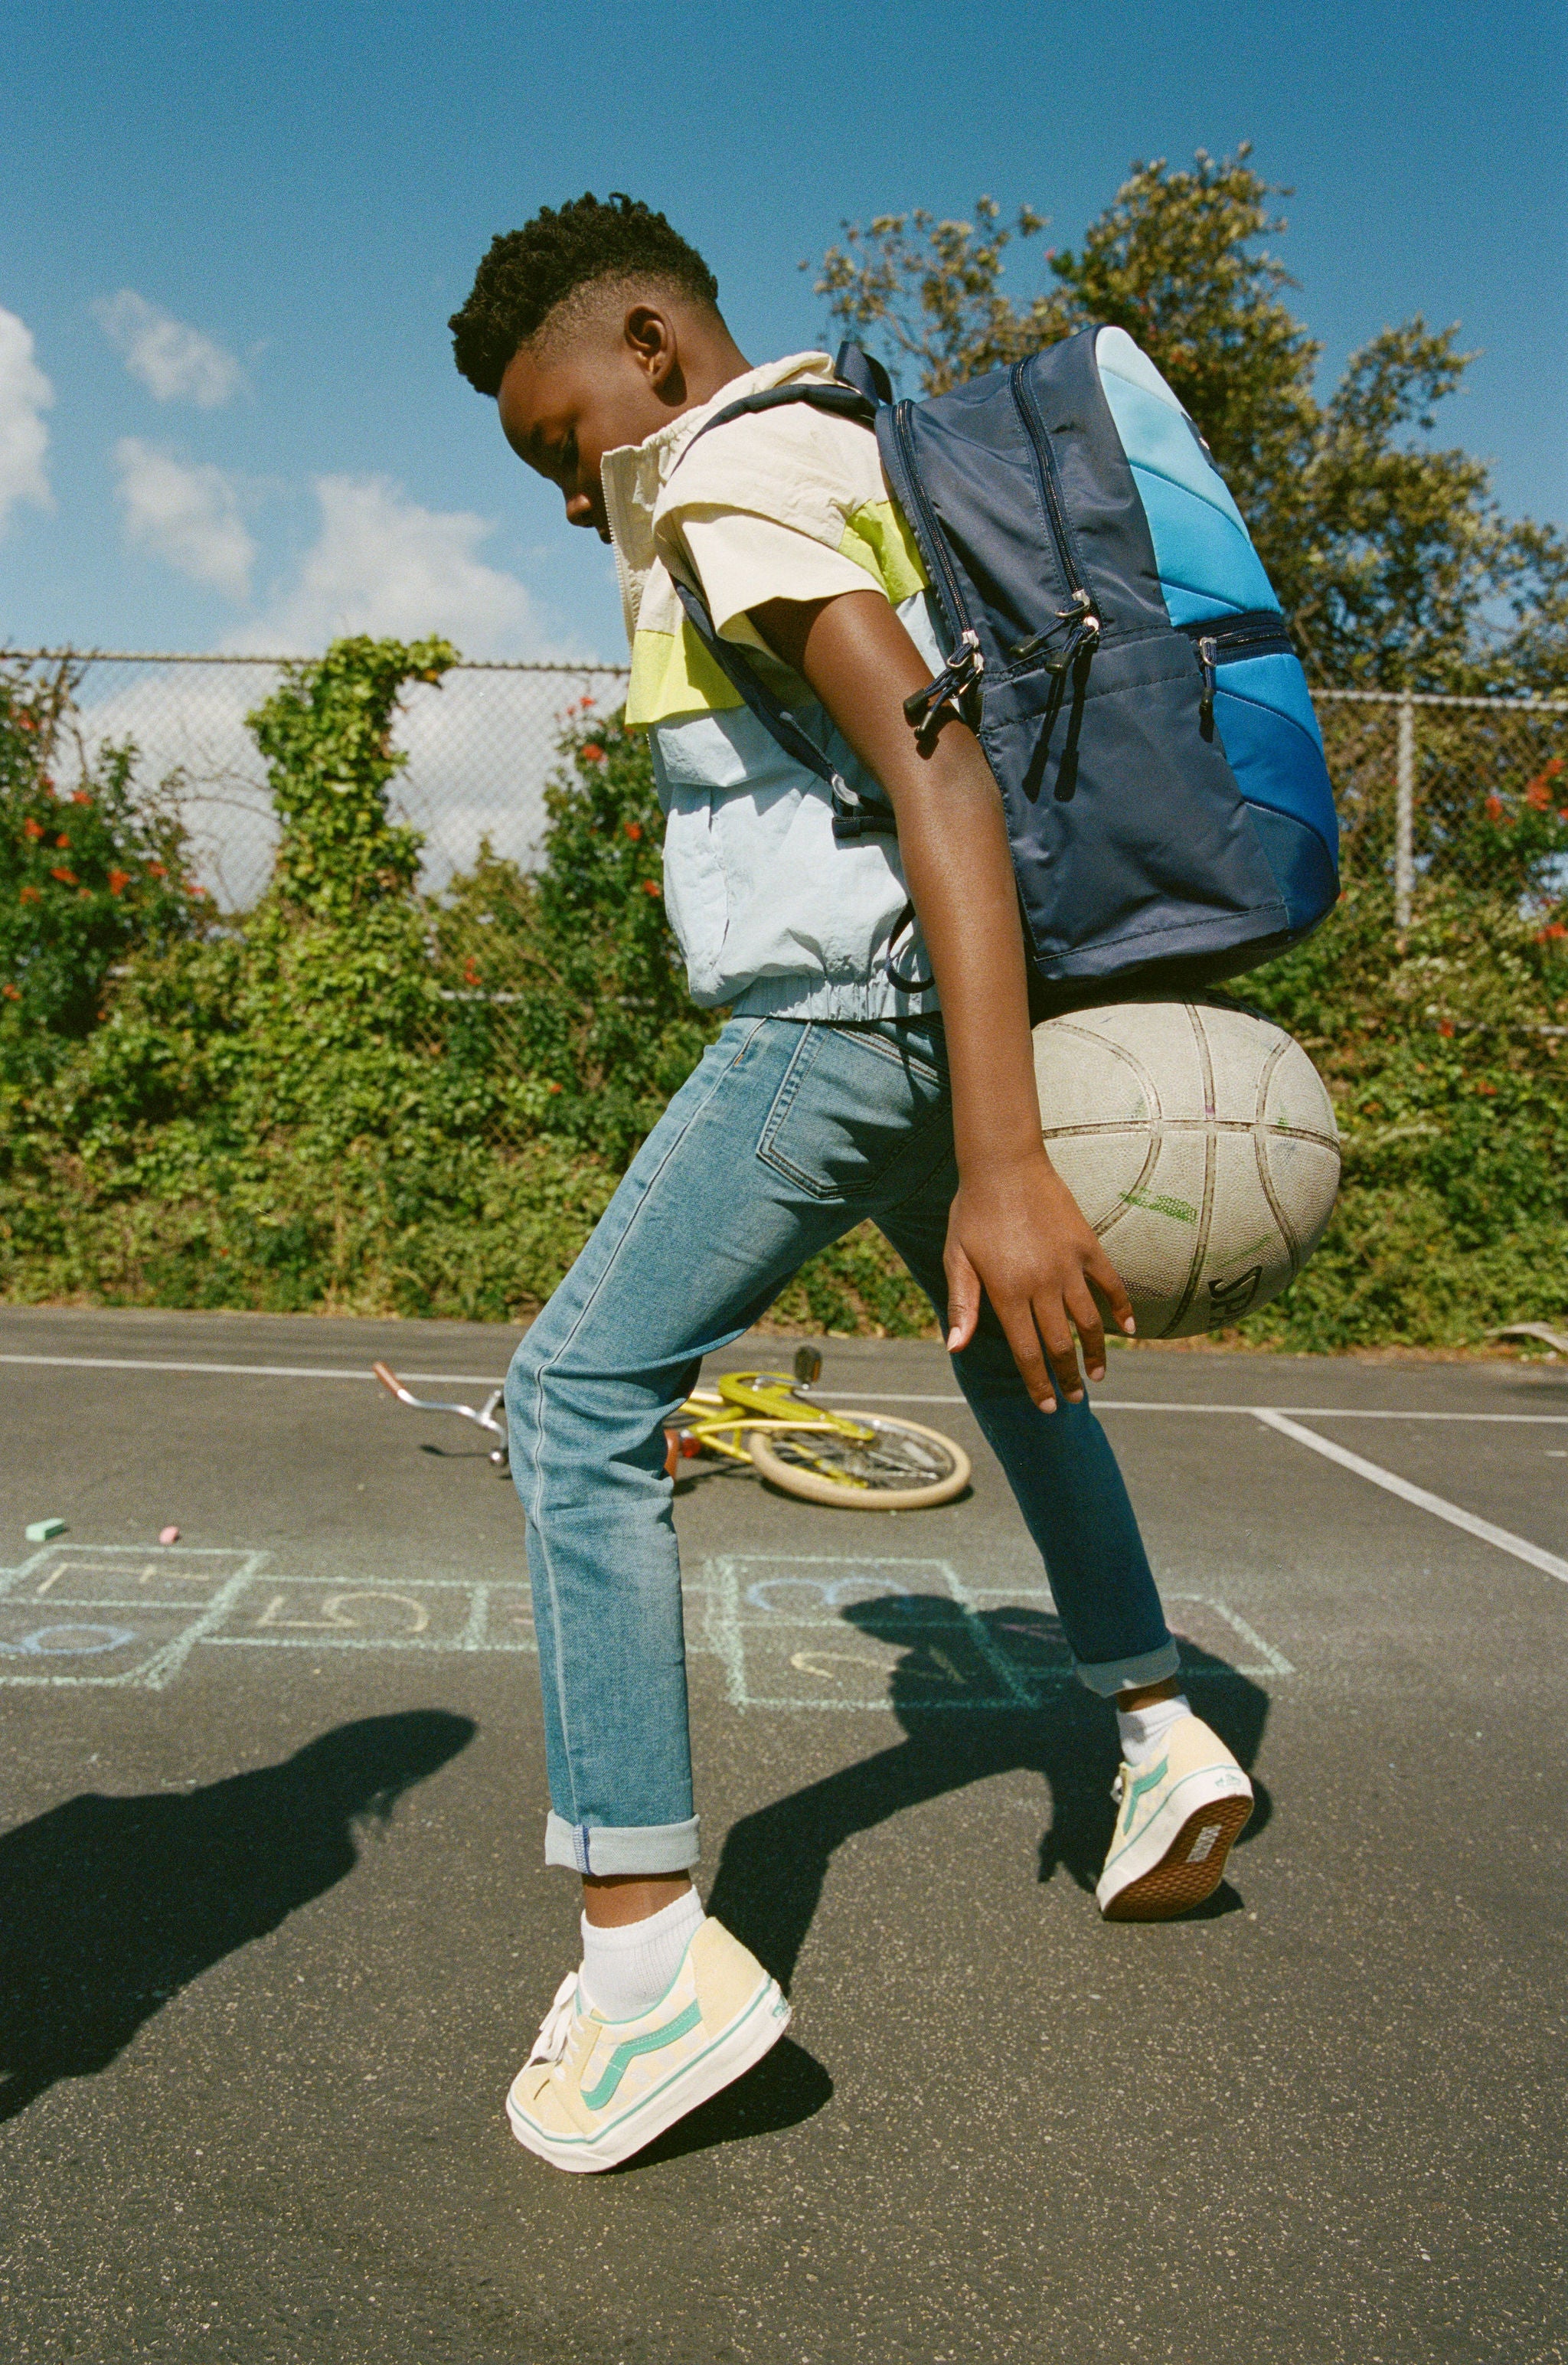 Our Favorite Back to School Backpacks